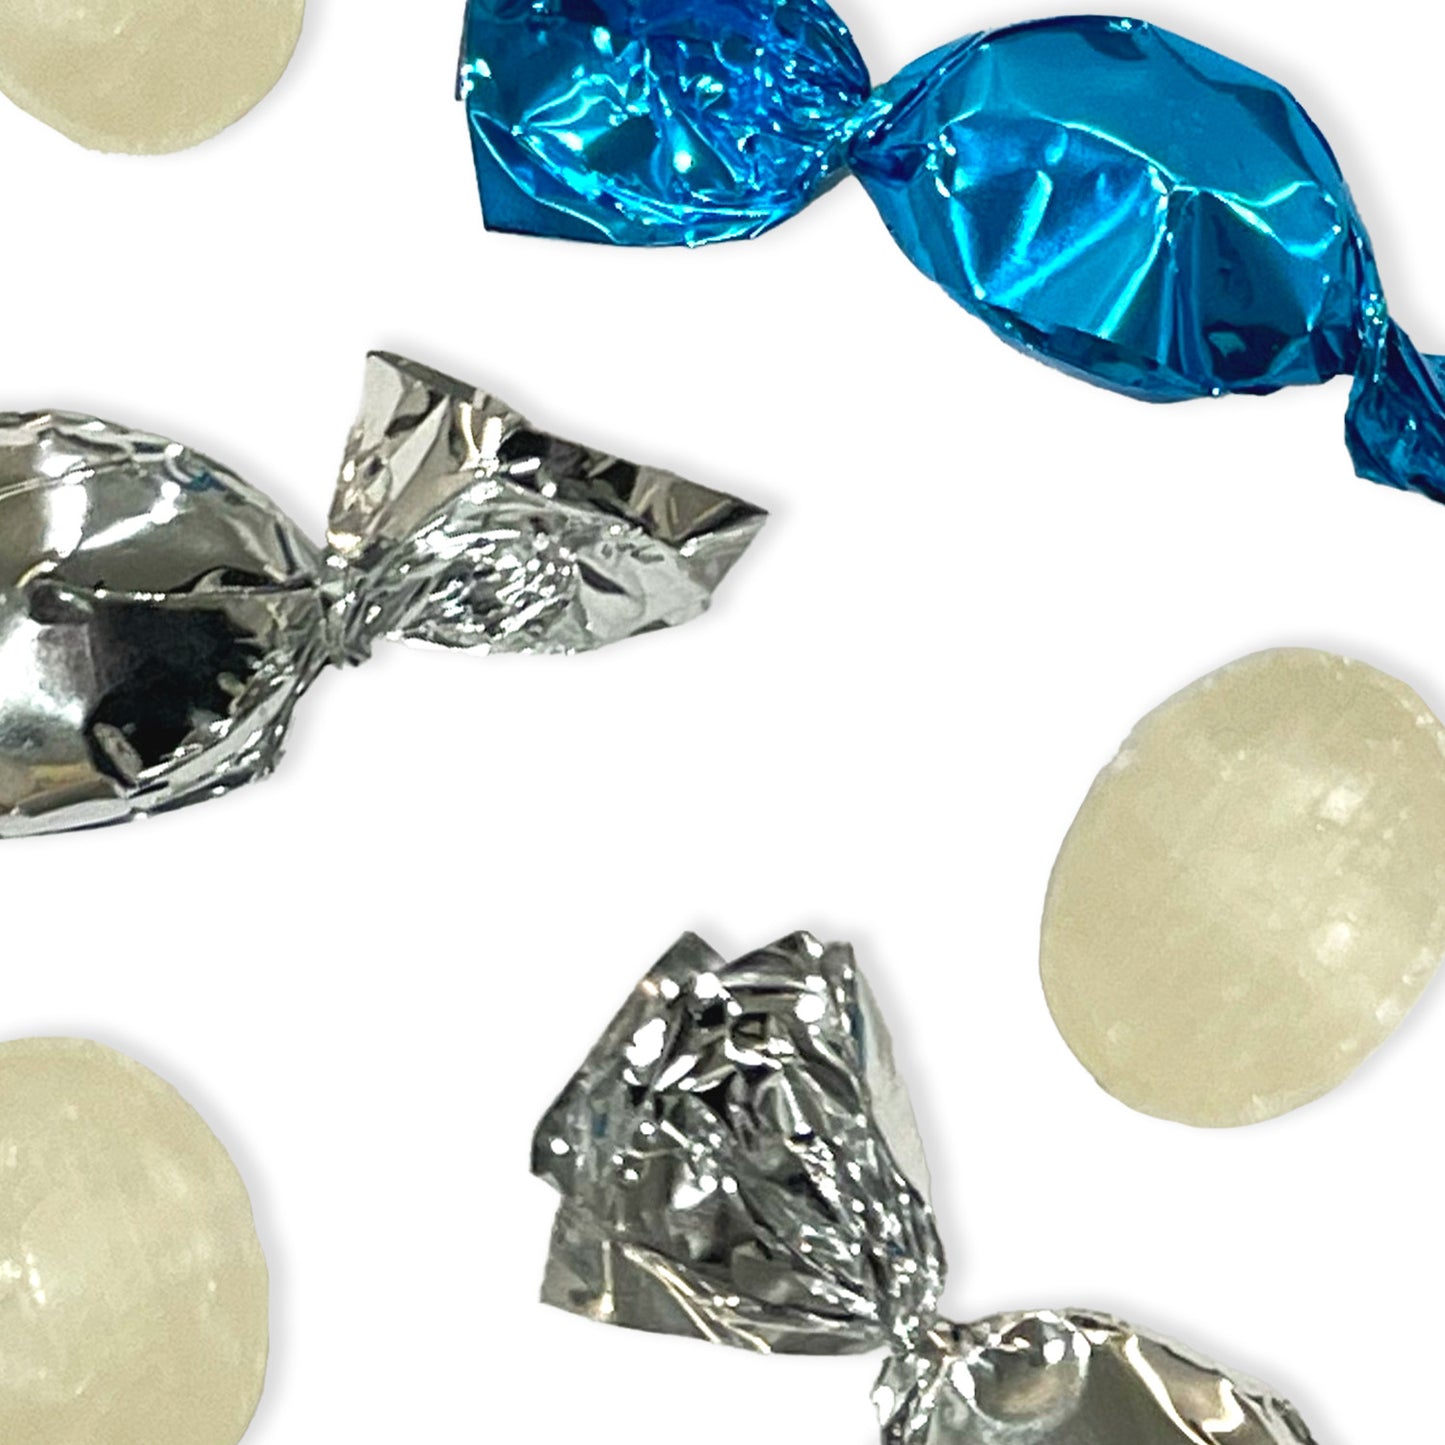 small, hard-boiled sweets, individually wrapped for freshness and convenience. These delightful peppermint-flavoured treats come in a vibrant mix of silver and blue wrappers